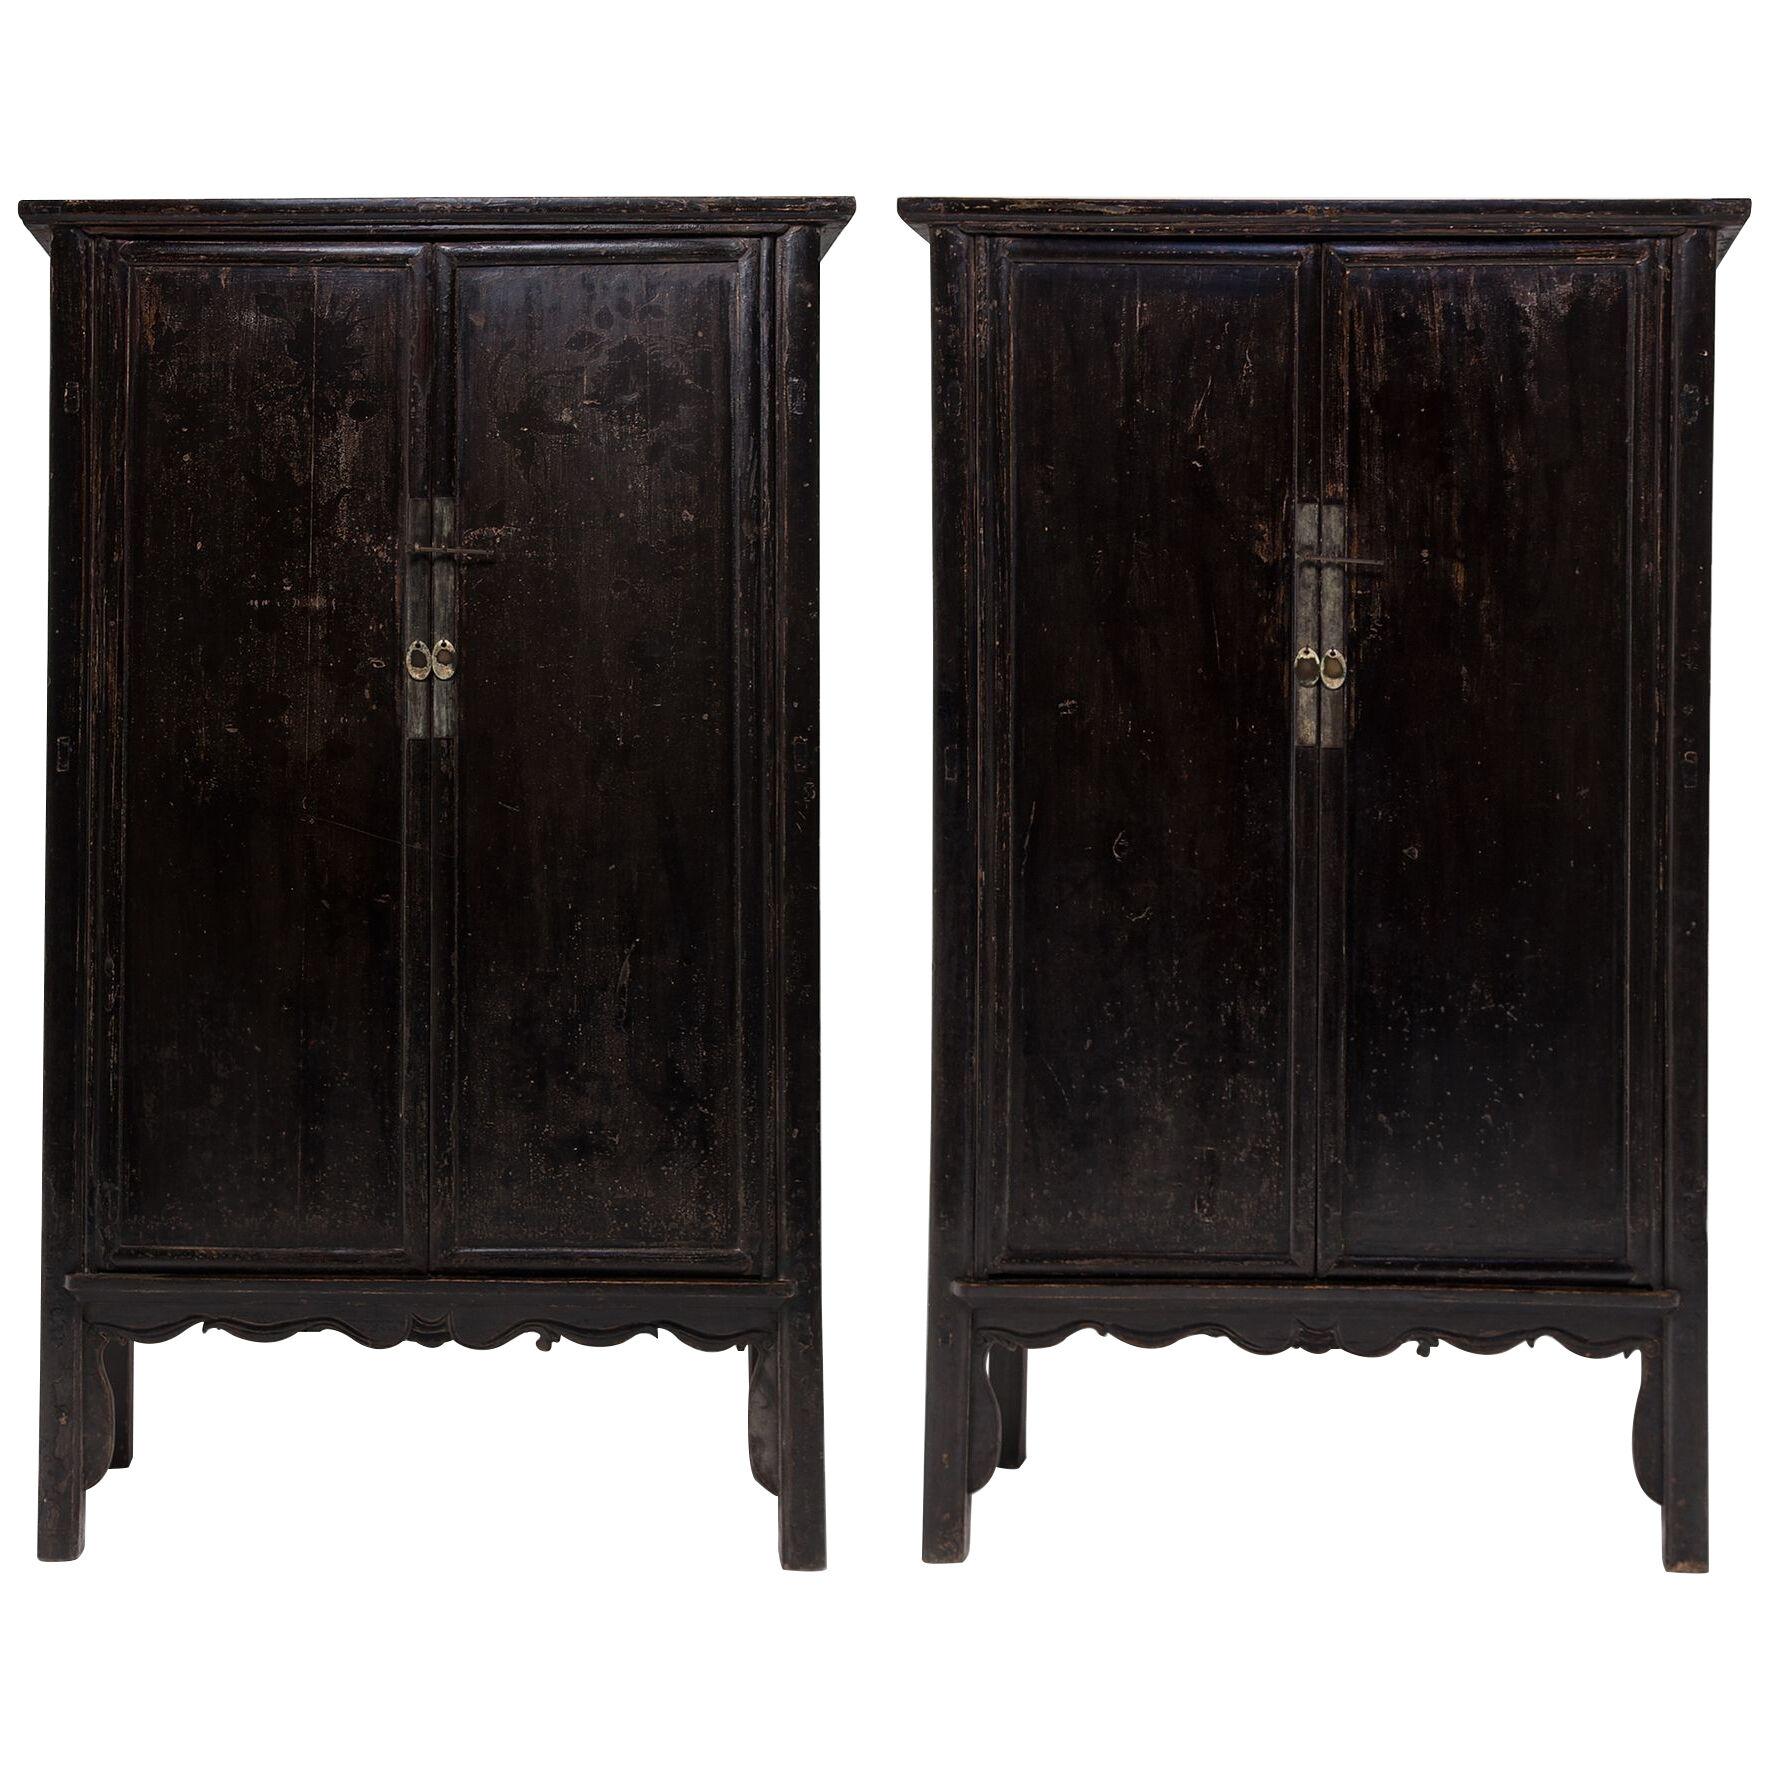 Pair of Black Lacquer Cabinets with Scalloped Aprons